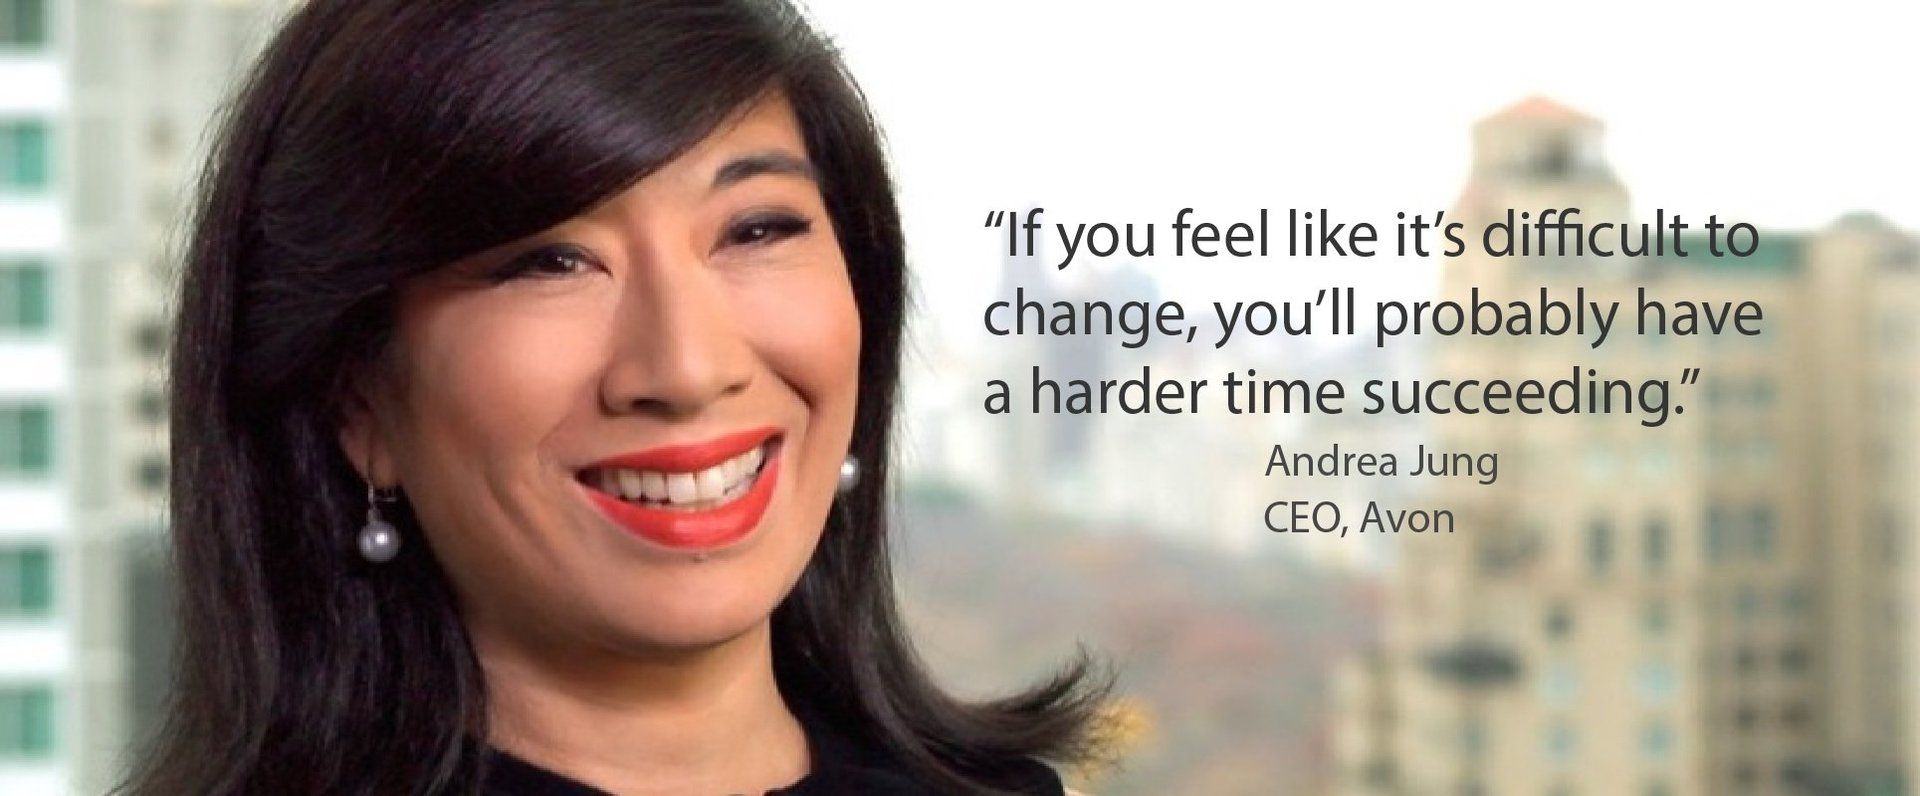 Andrea Jung CEO of Avon on change and business disruption